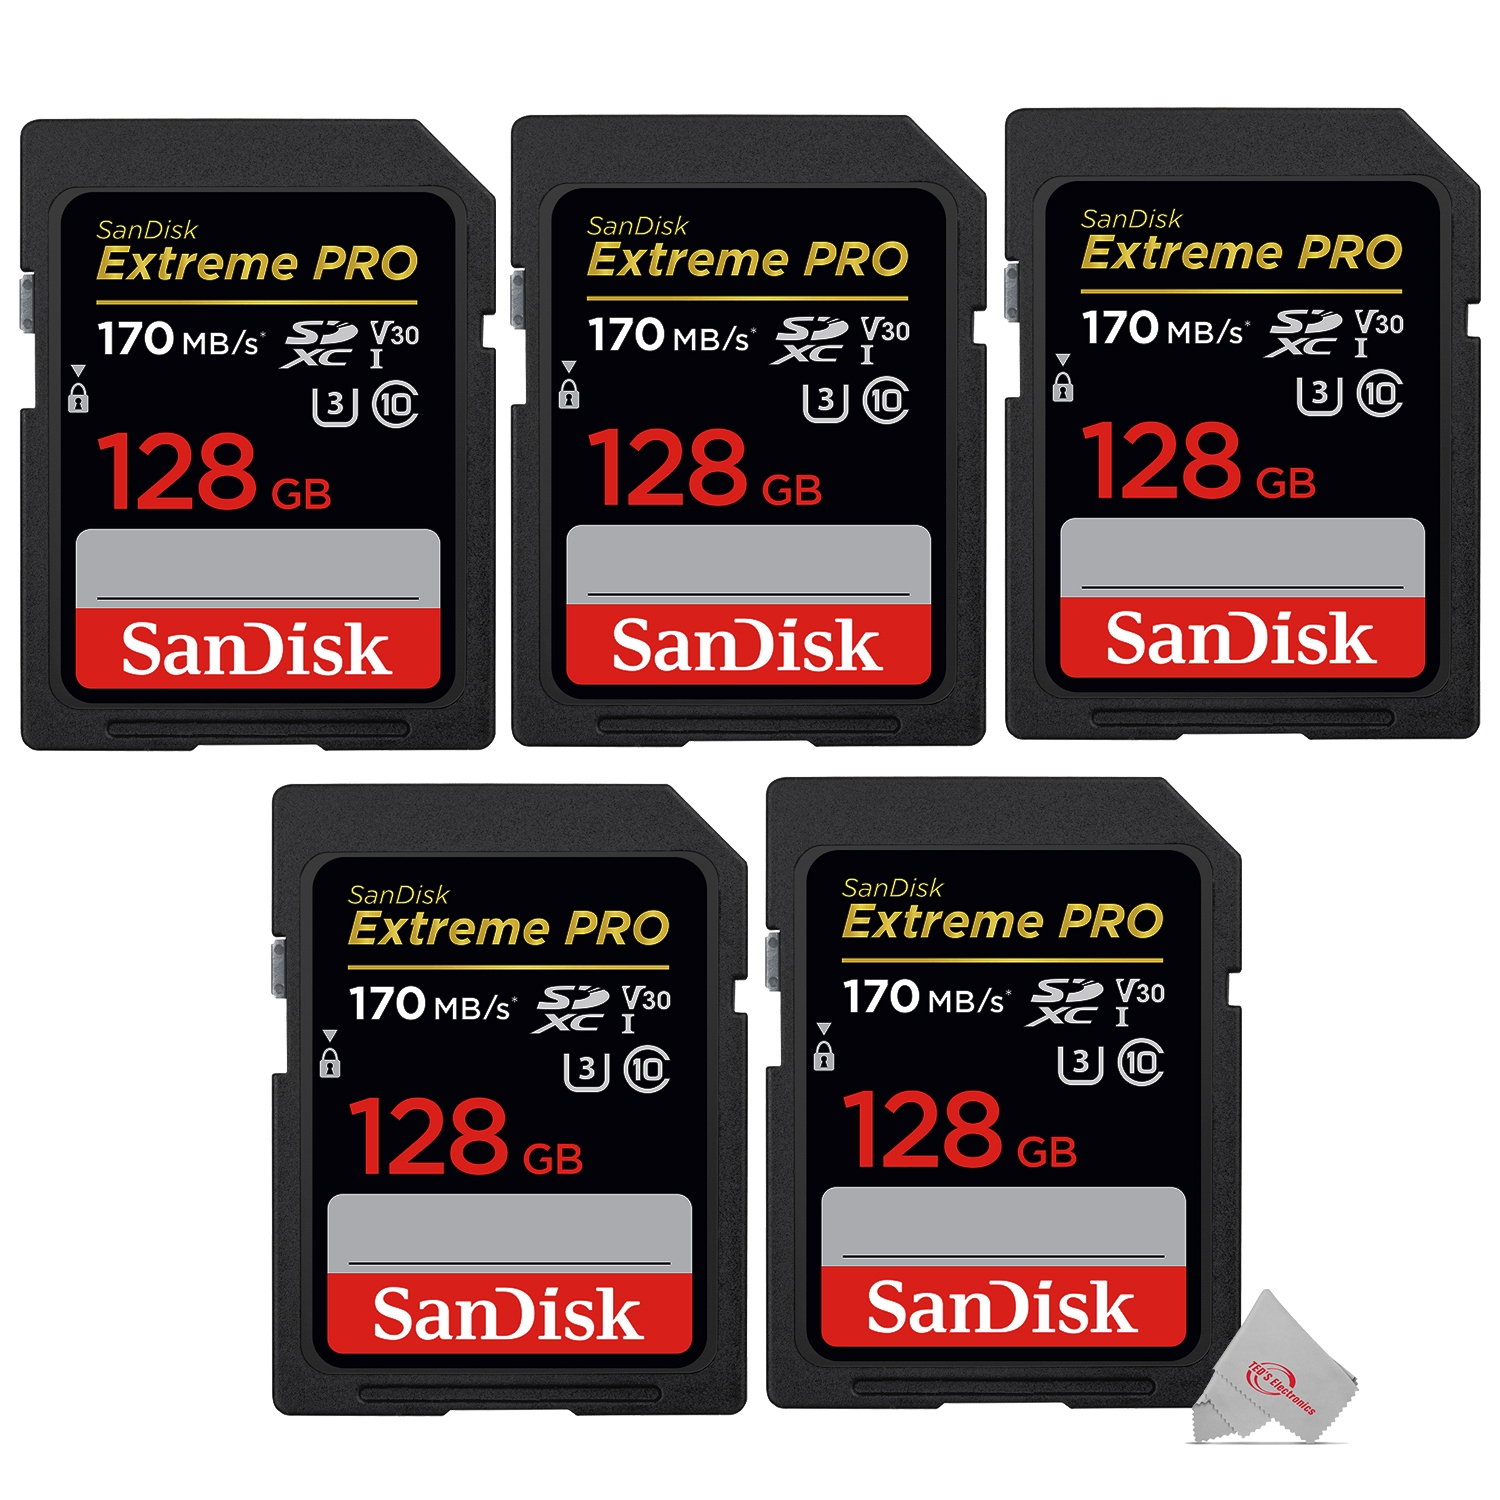 5x SanDisk Extreme Pro 128GB SDXC UHS-I/U3 V30 Class 10 Memory Card, Speed Up to 170MB/s (SDSDXXY-128G-GN4IN) - image 1 of 3